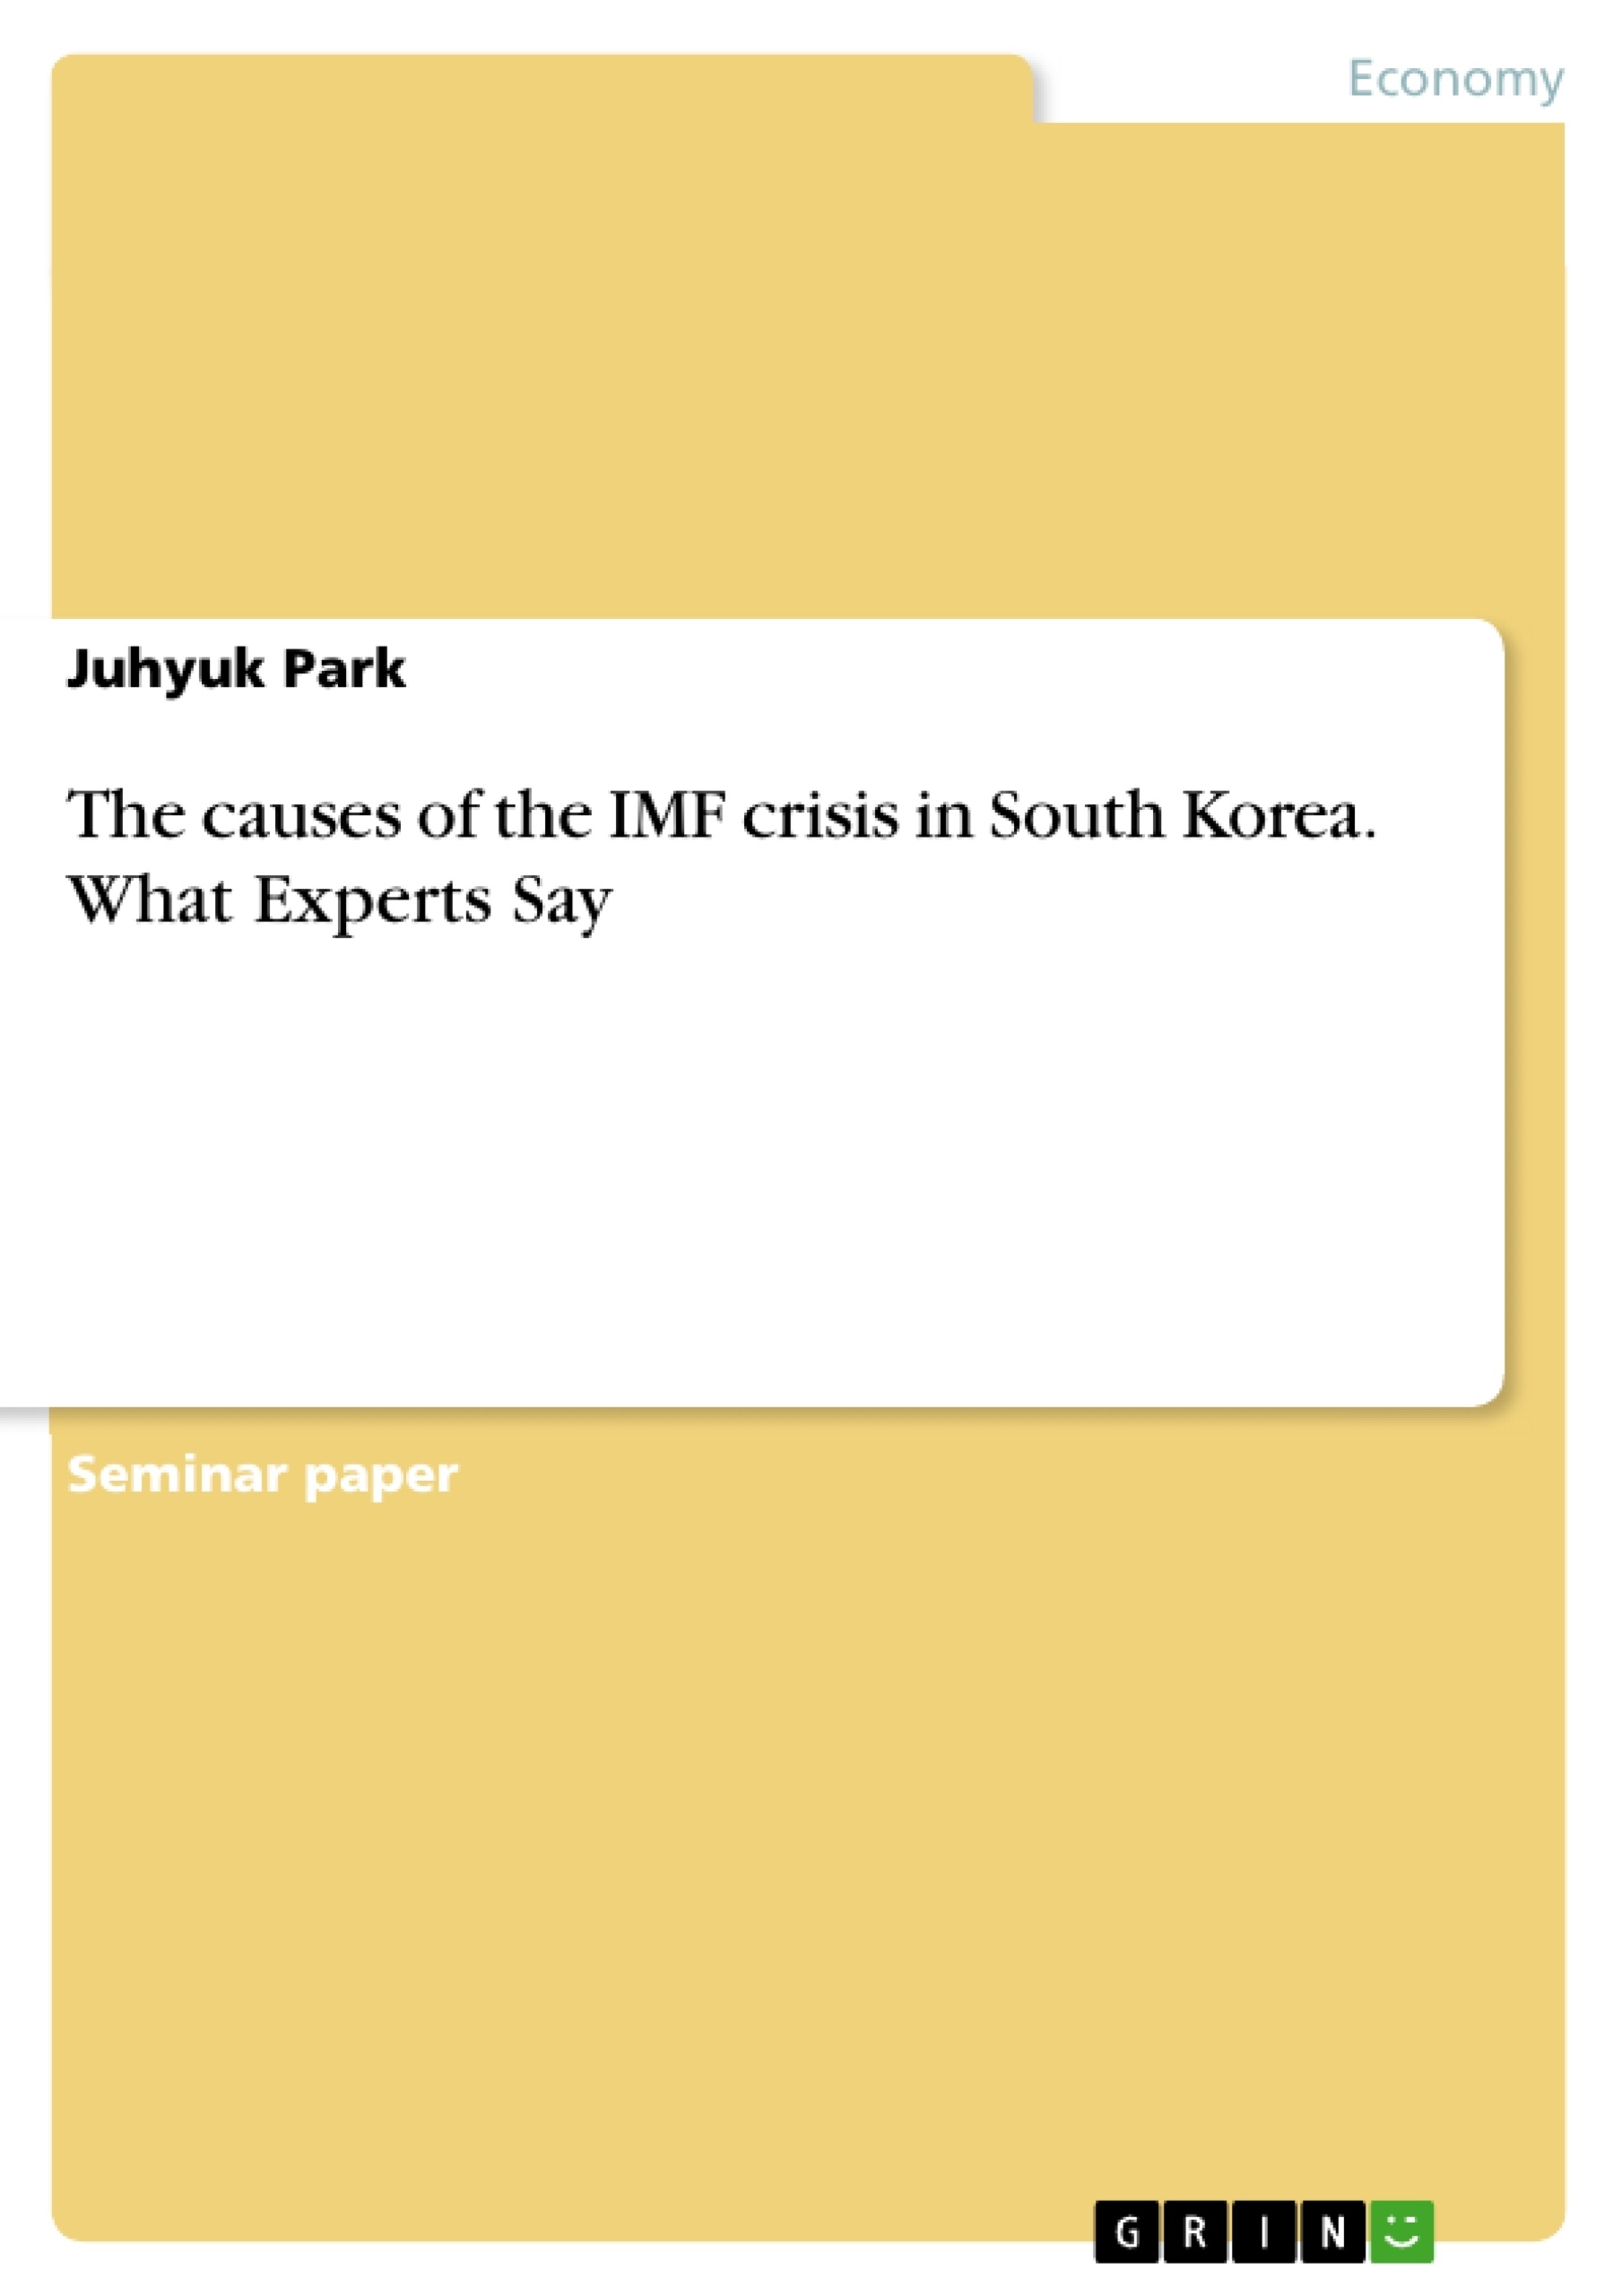 Title: The causes of the IMF crisis in South Korea. What Experts Say